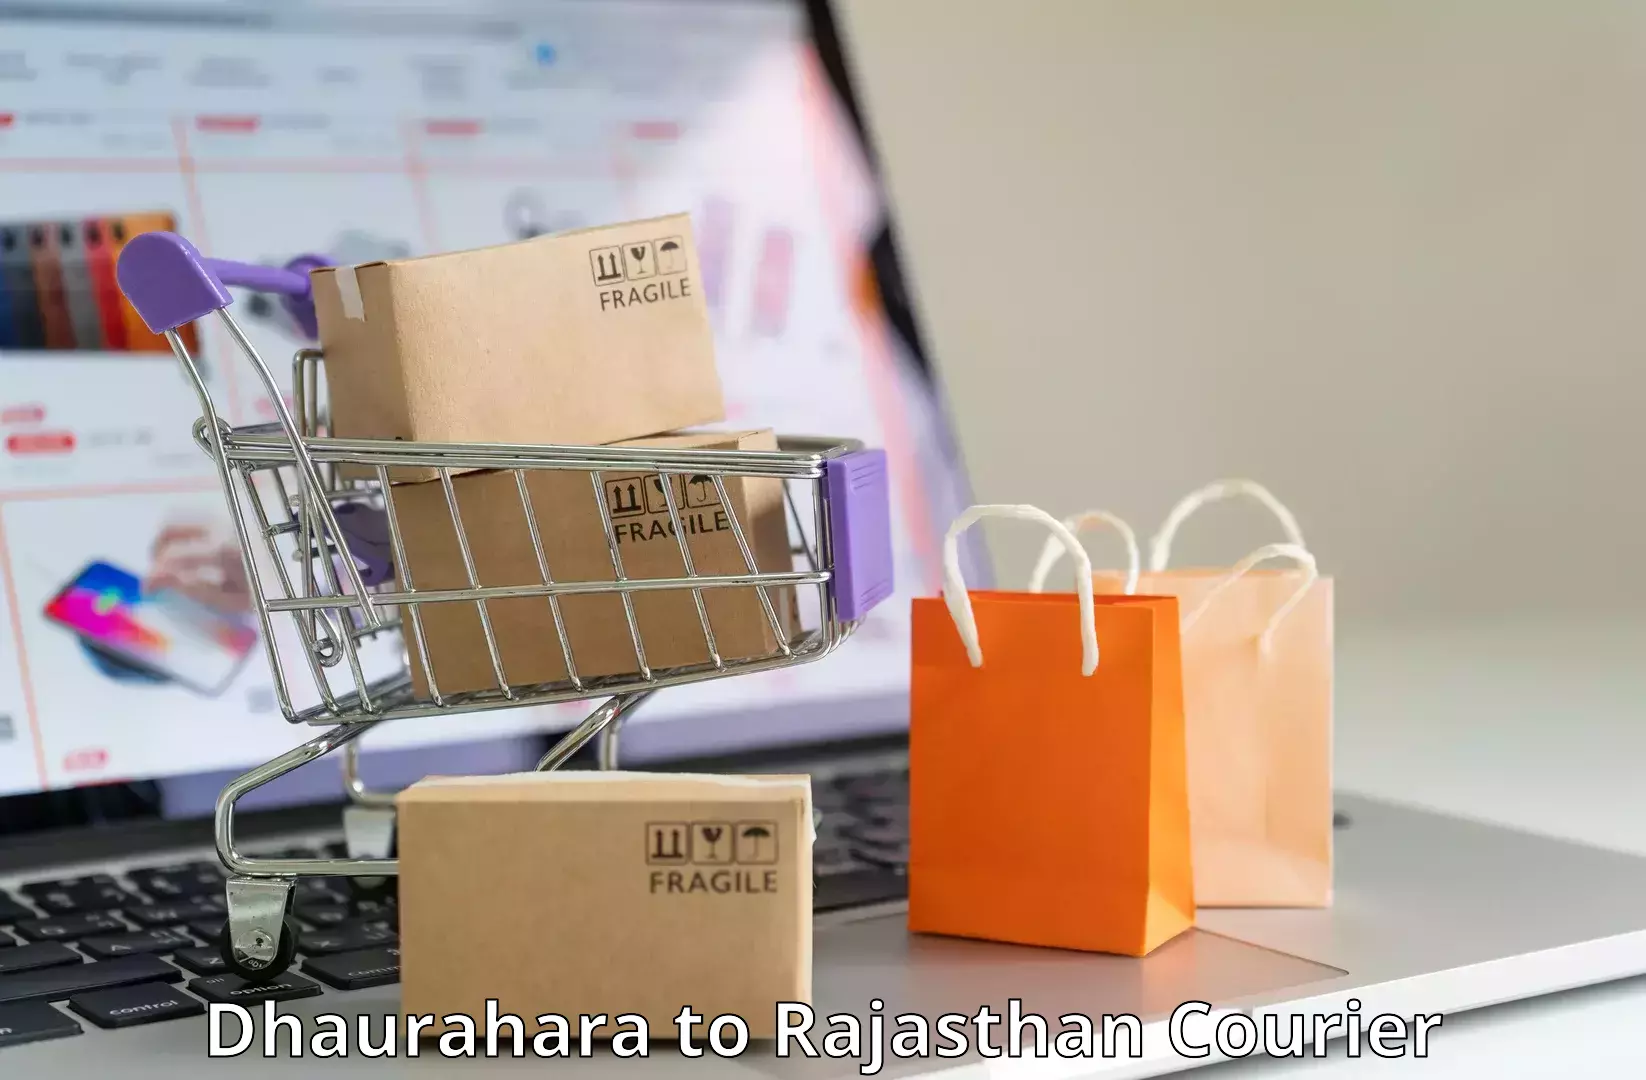 24-hour courier service Dhaurahara to Rajasthan